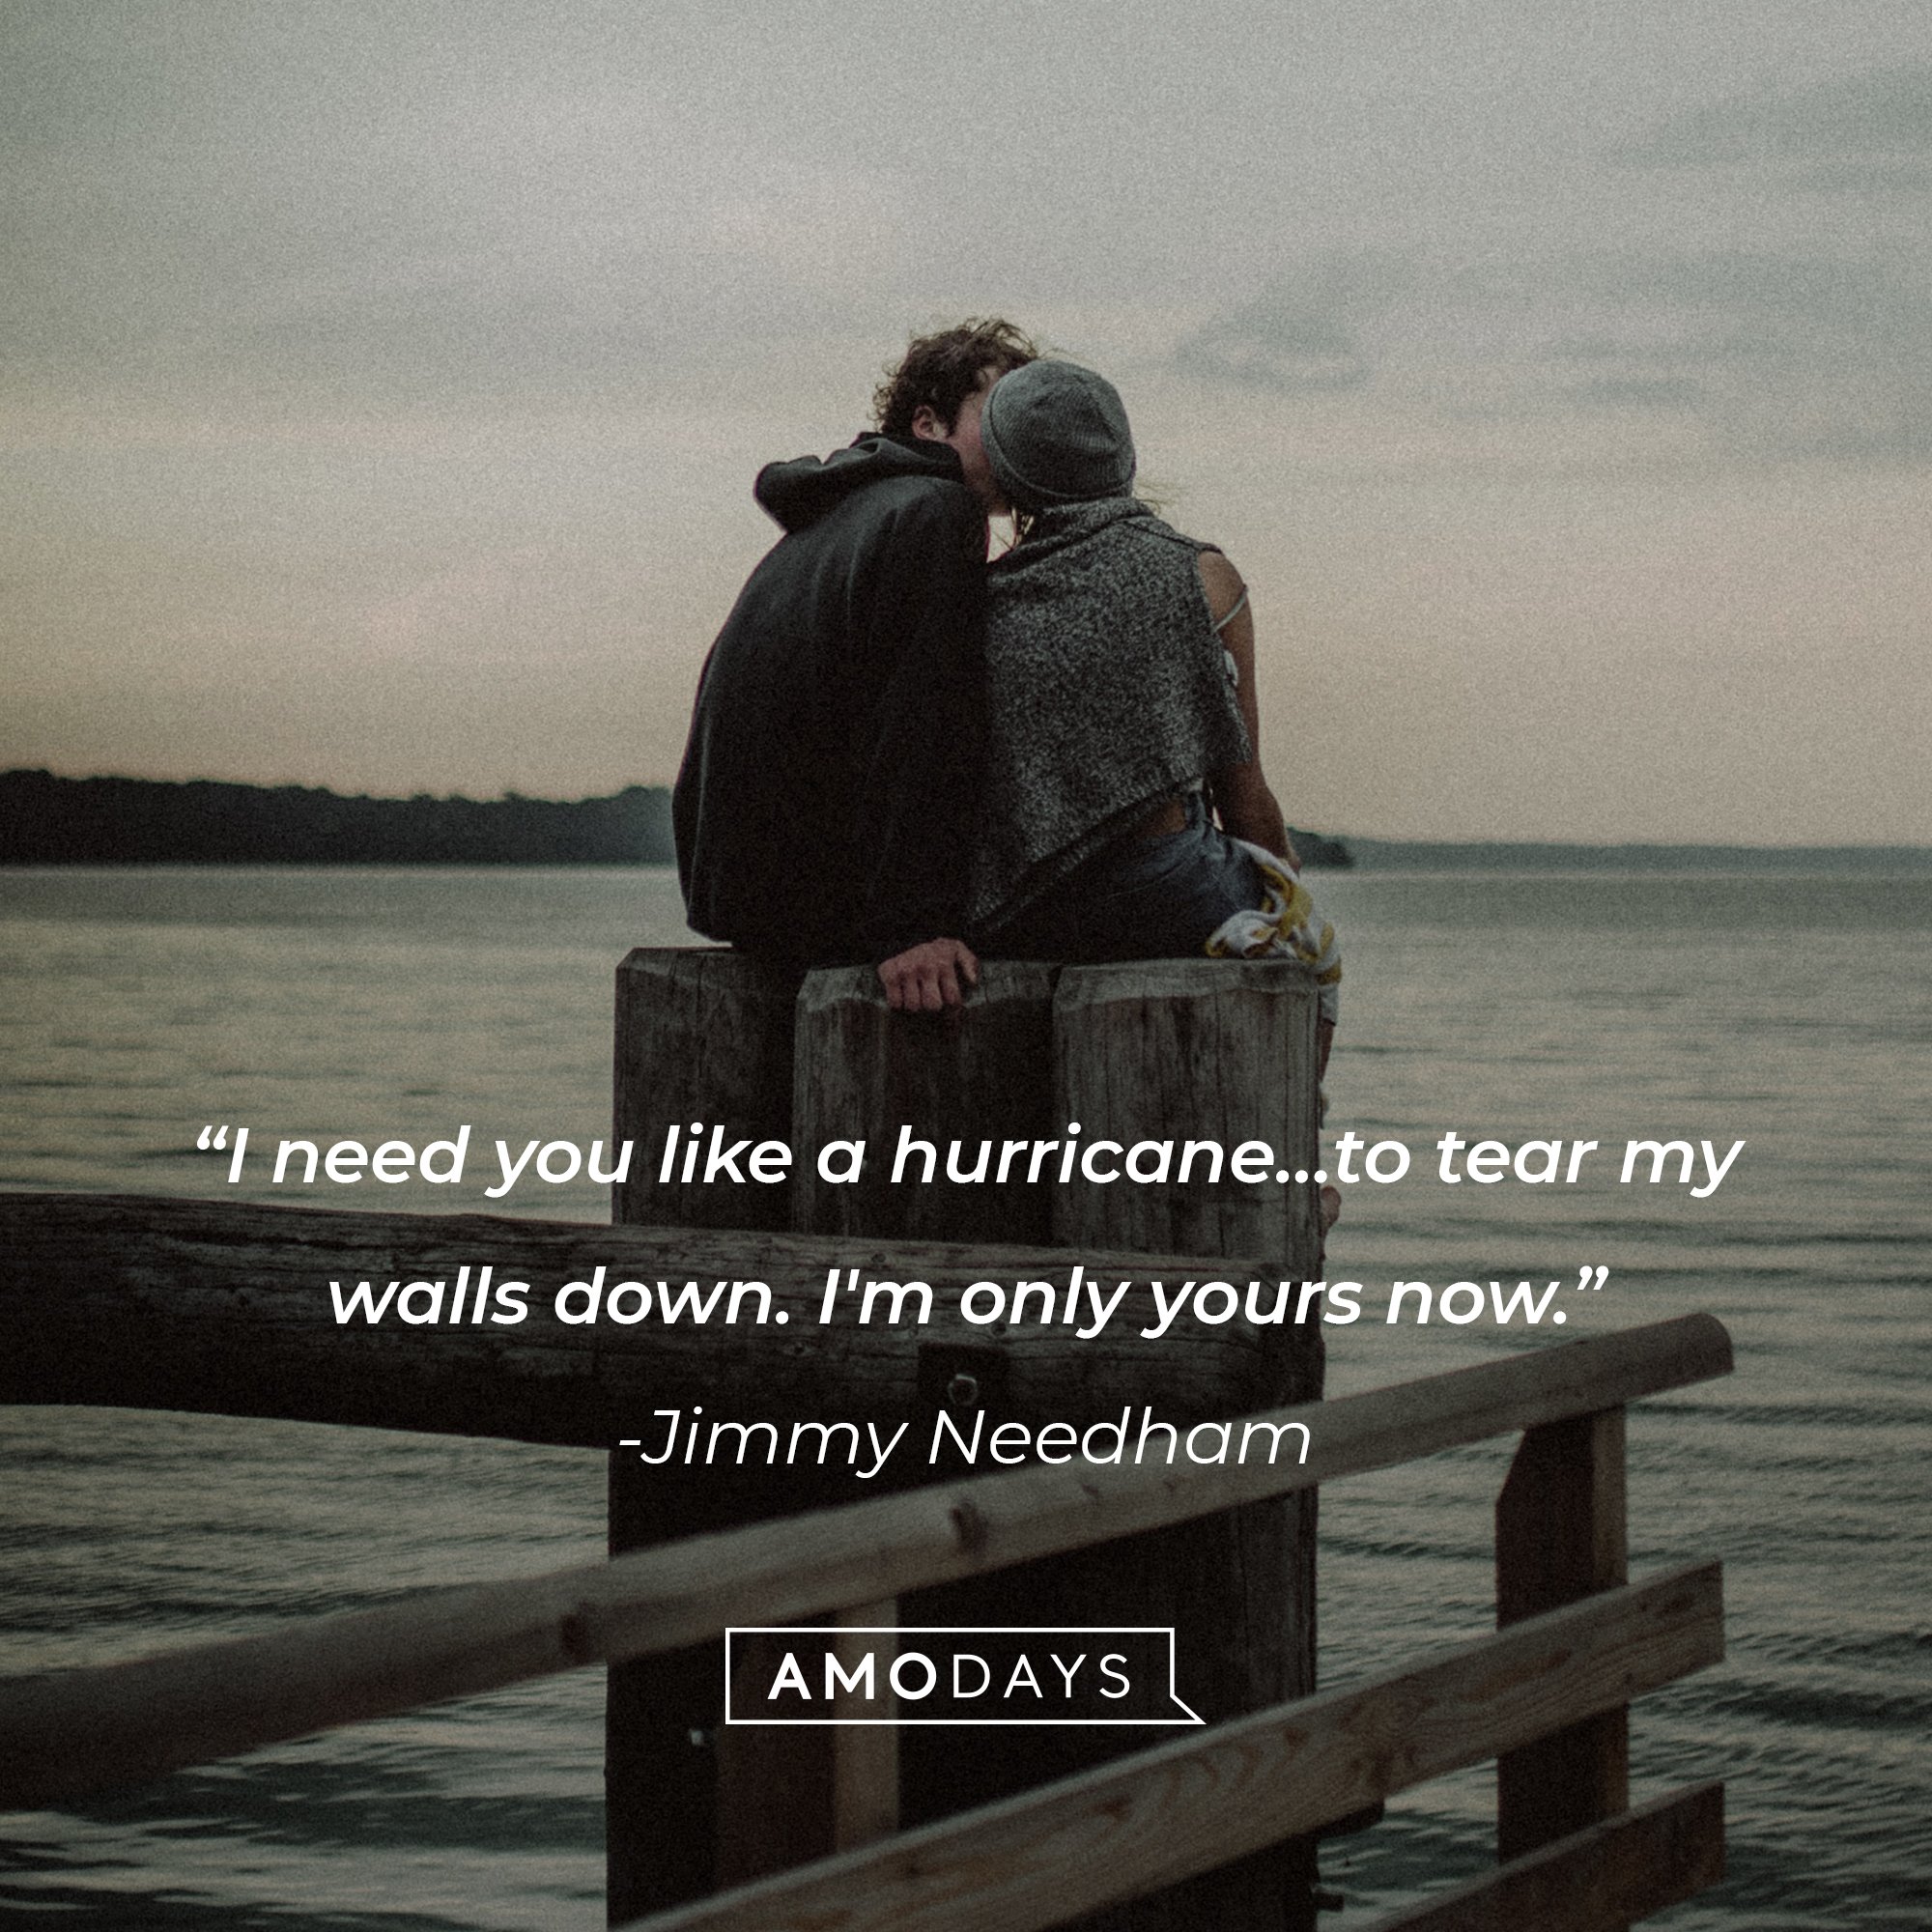 Jimmy Needham’s quote: "I need you like a hurricane…to tear my walls down. I'm only yours now." | Image: AmoDays